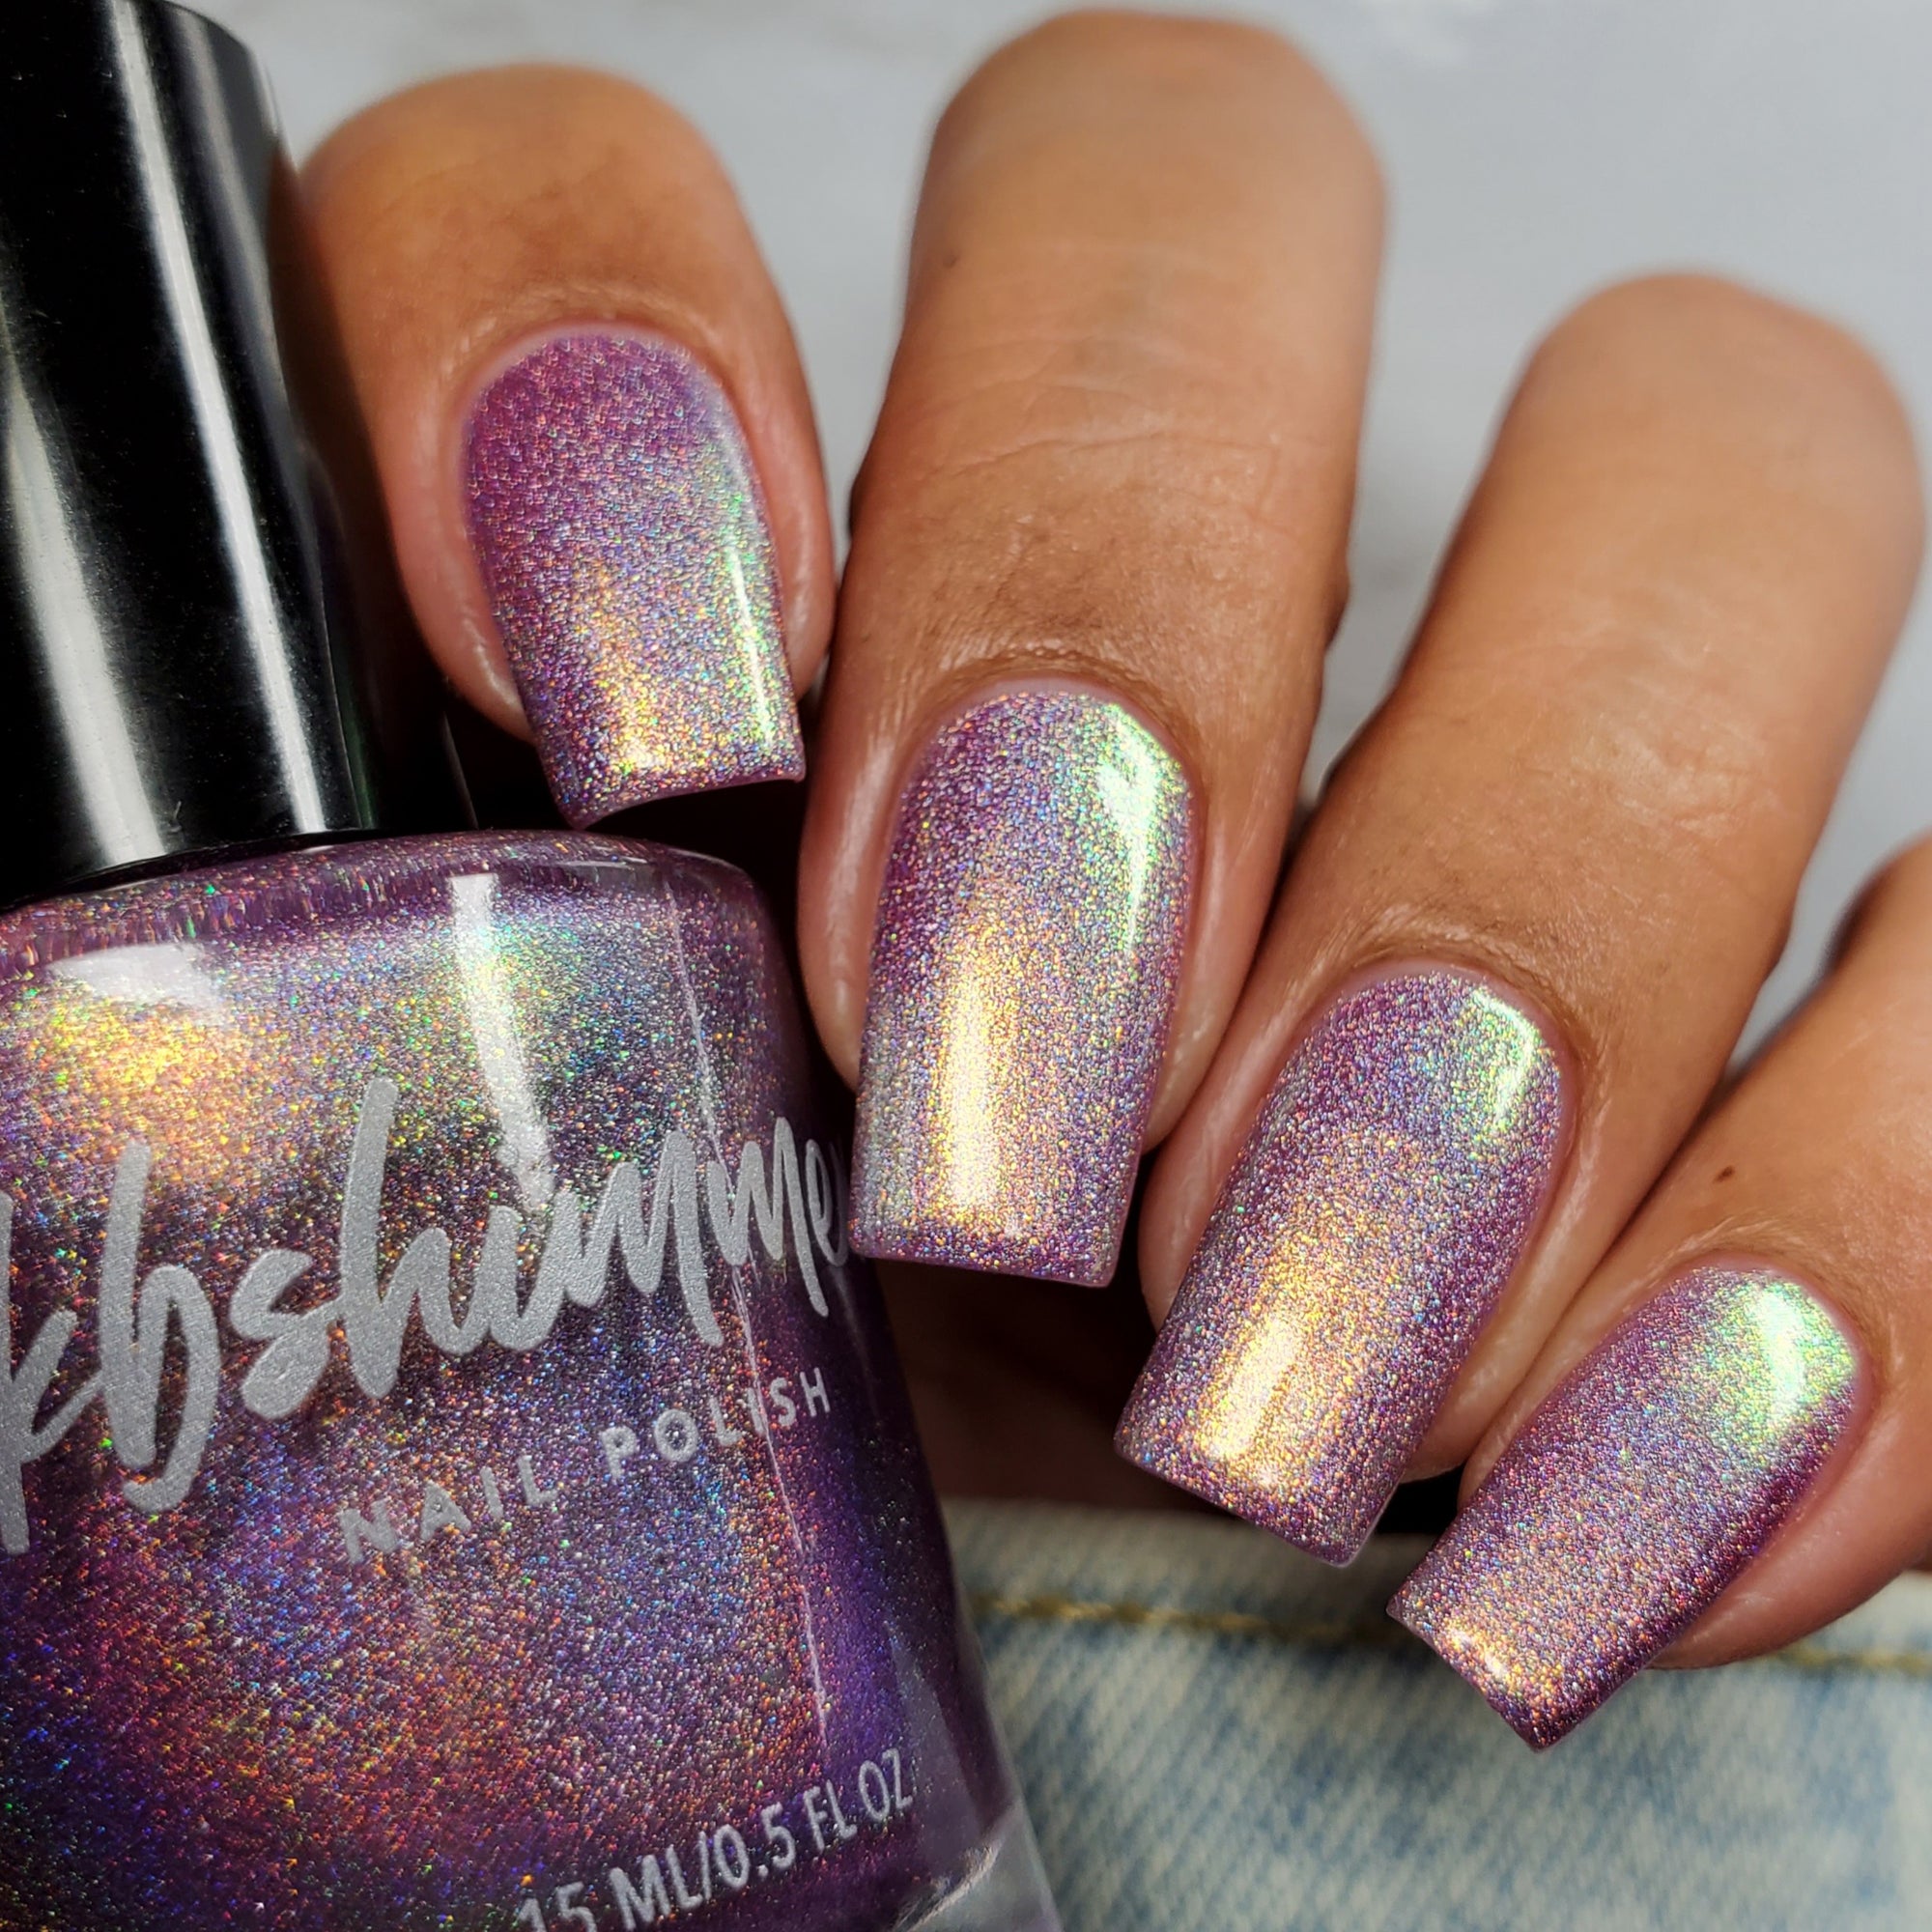 *PRE-SALE* KBShimmer - Such A Smartie